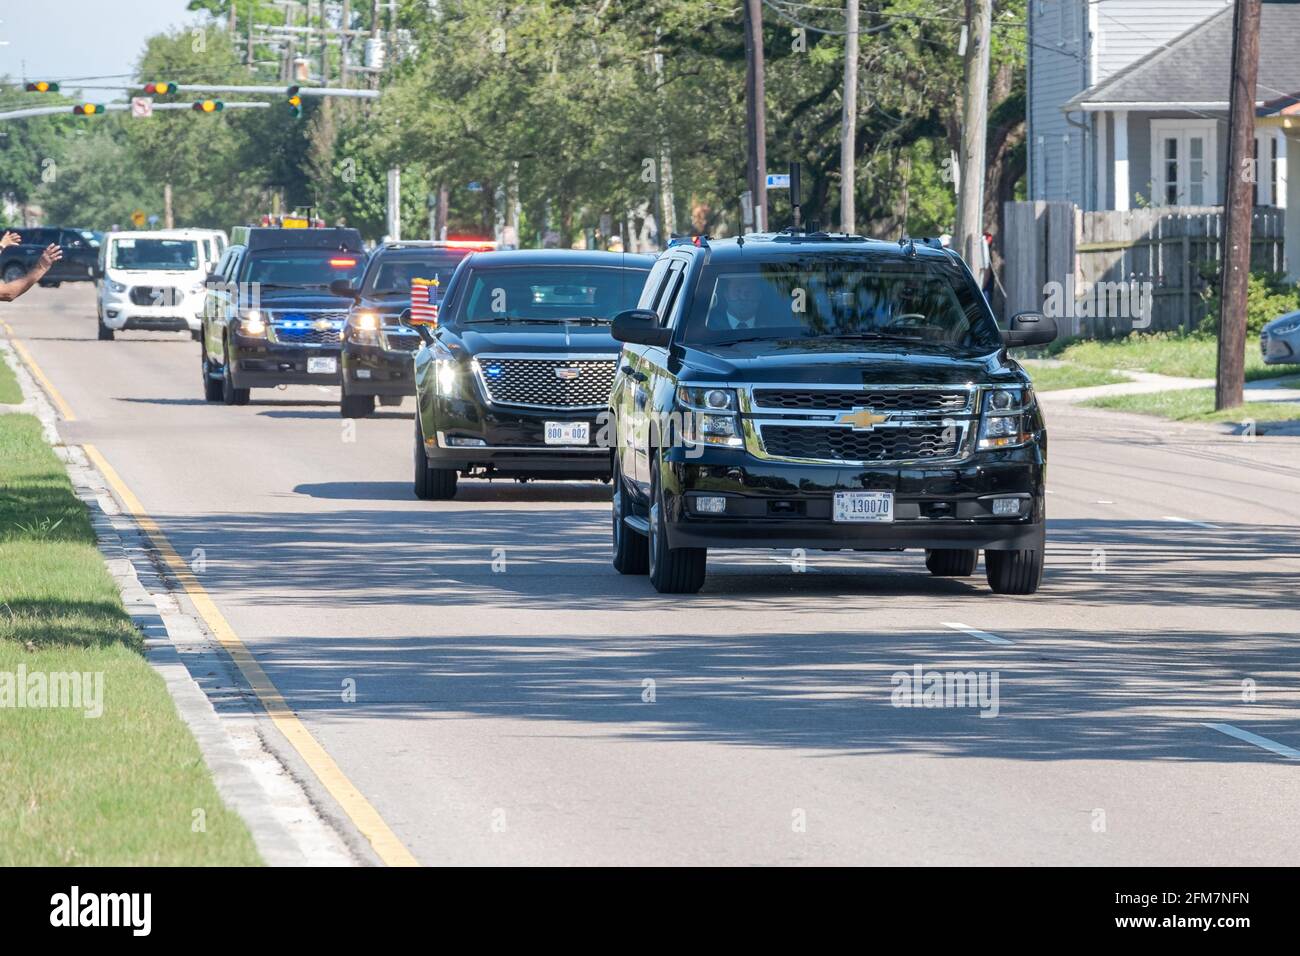 NEW ORLEANS, LA, USA - MAY 6, 2021: President Joe Biden's motorcade travels rapidly up Claiborne Avenue for speech at Sewerage and Water Board Stock Photo